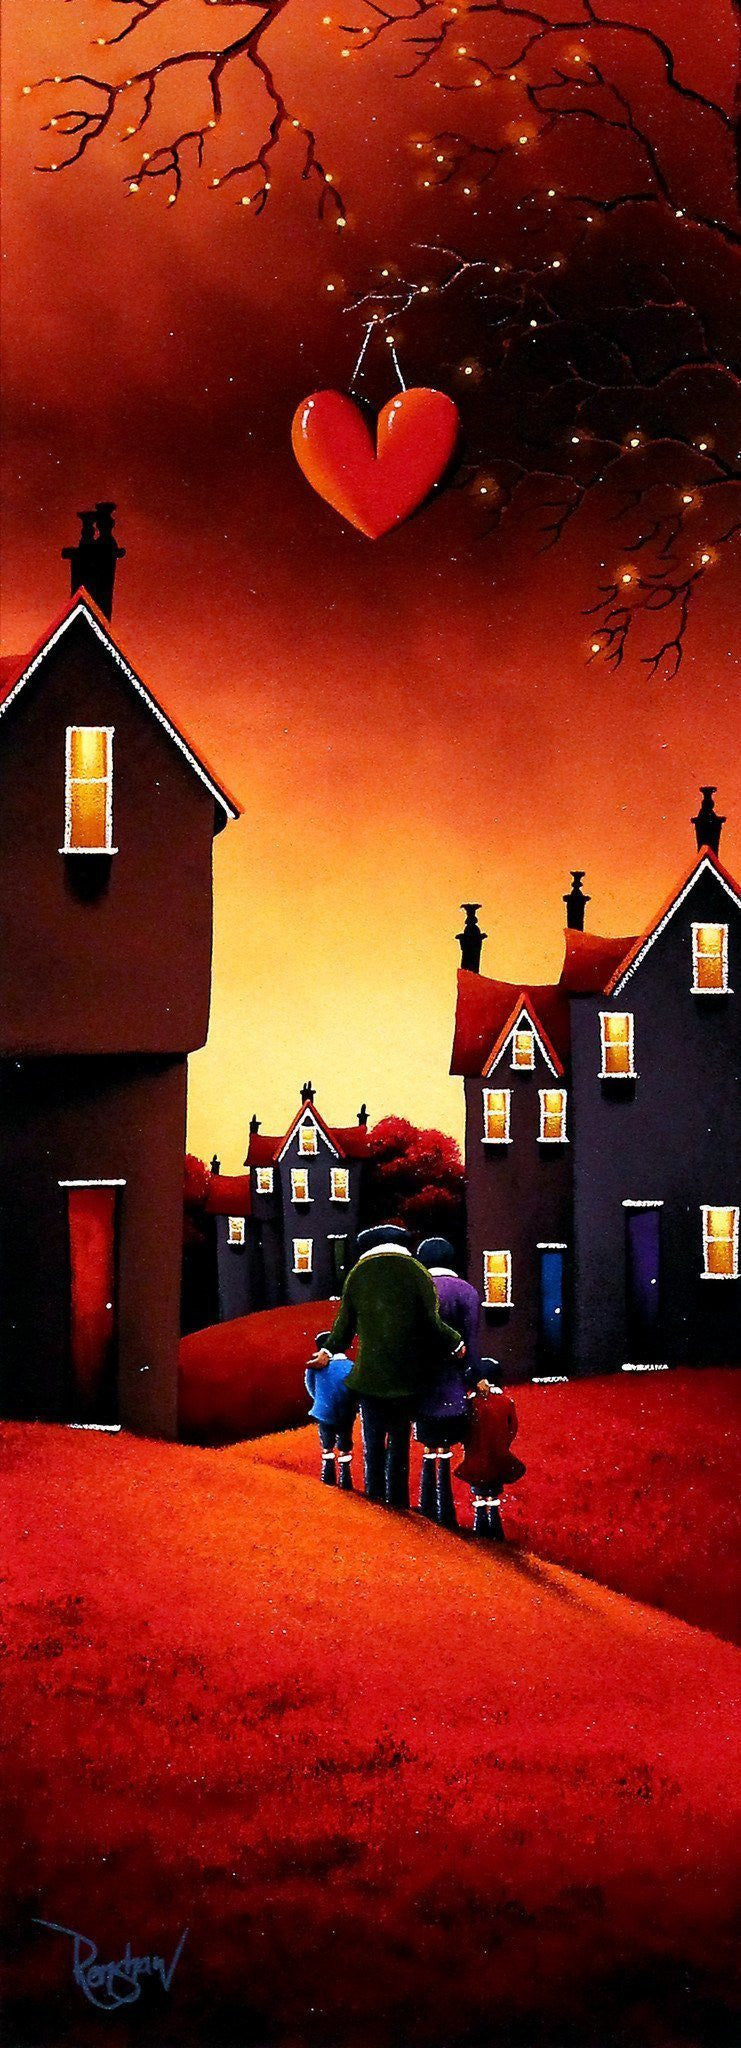 Home Is Where The Heart Is - SOLD David Renshaw